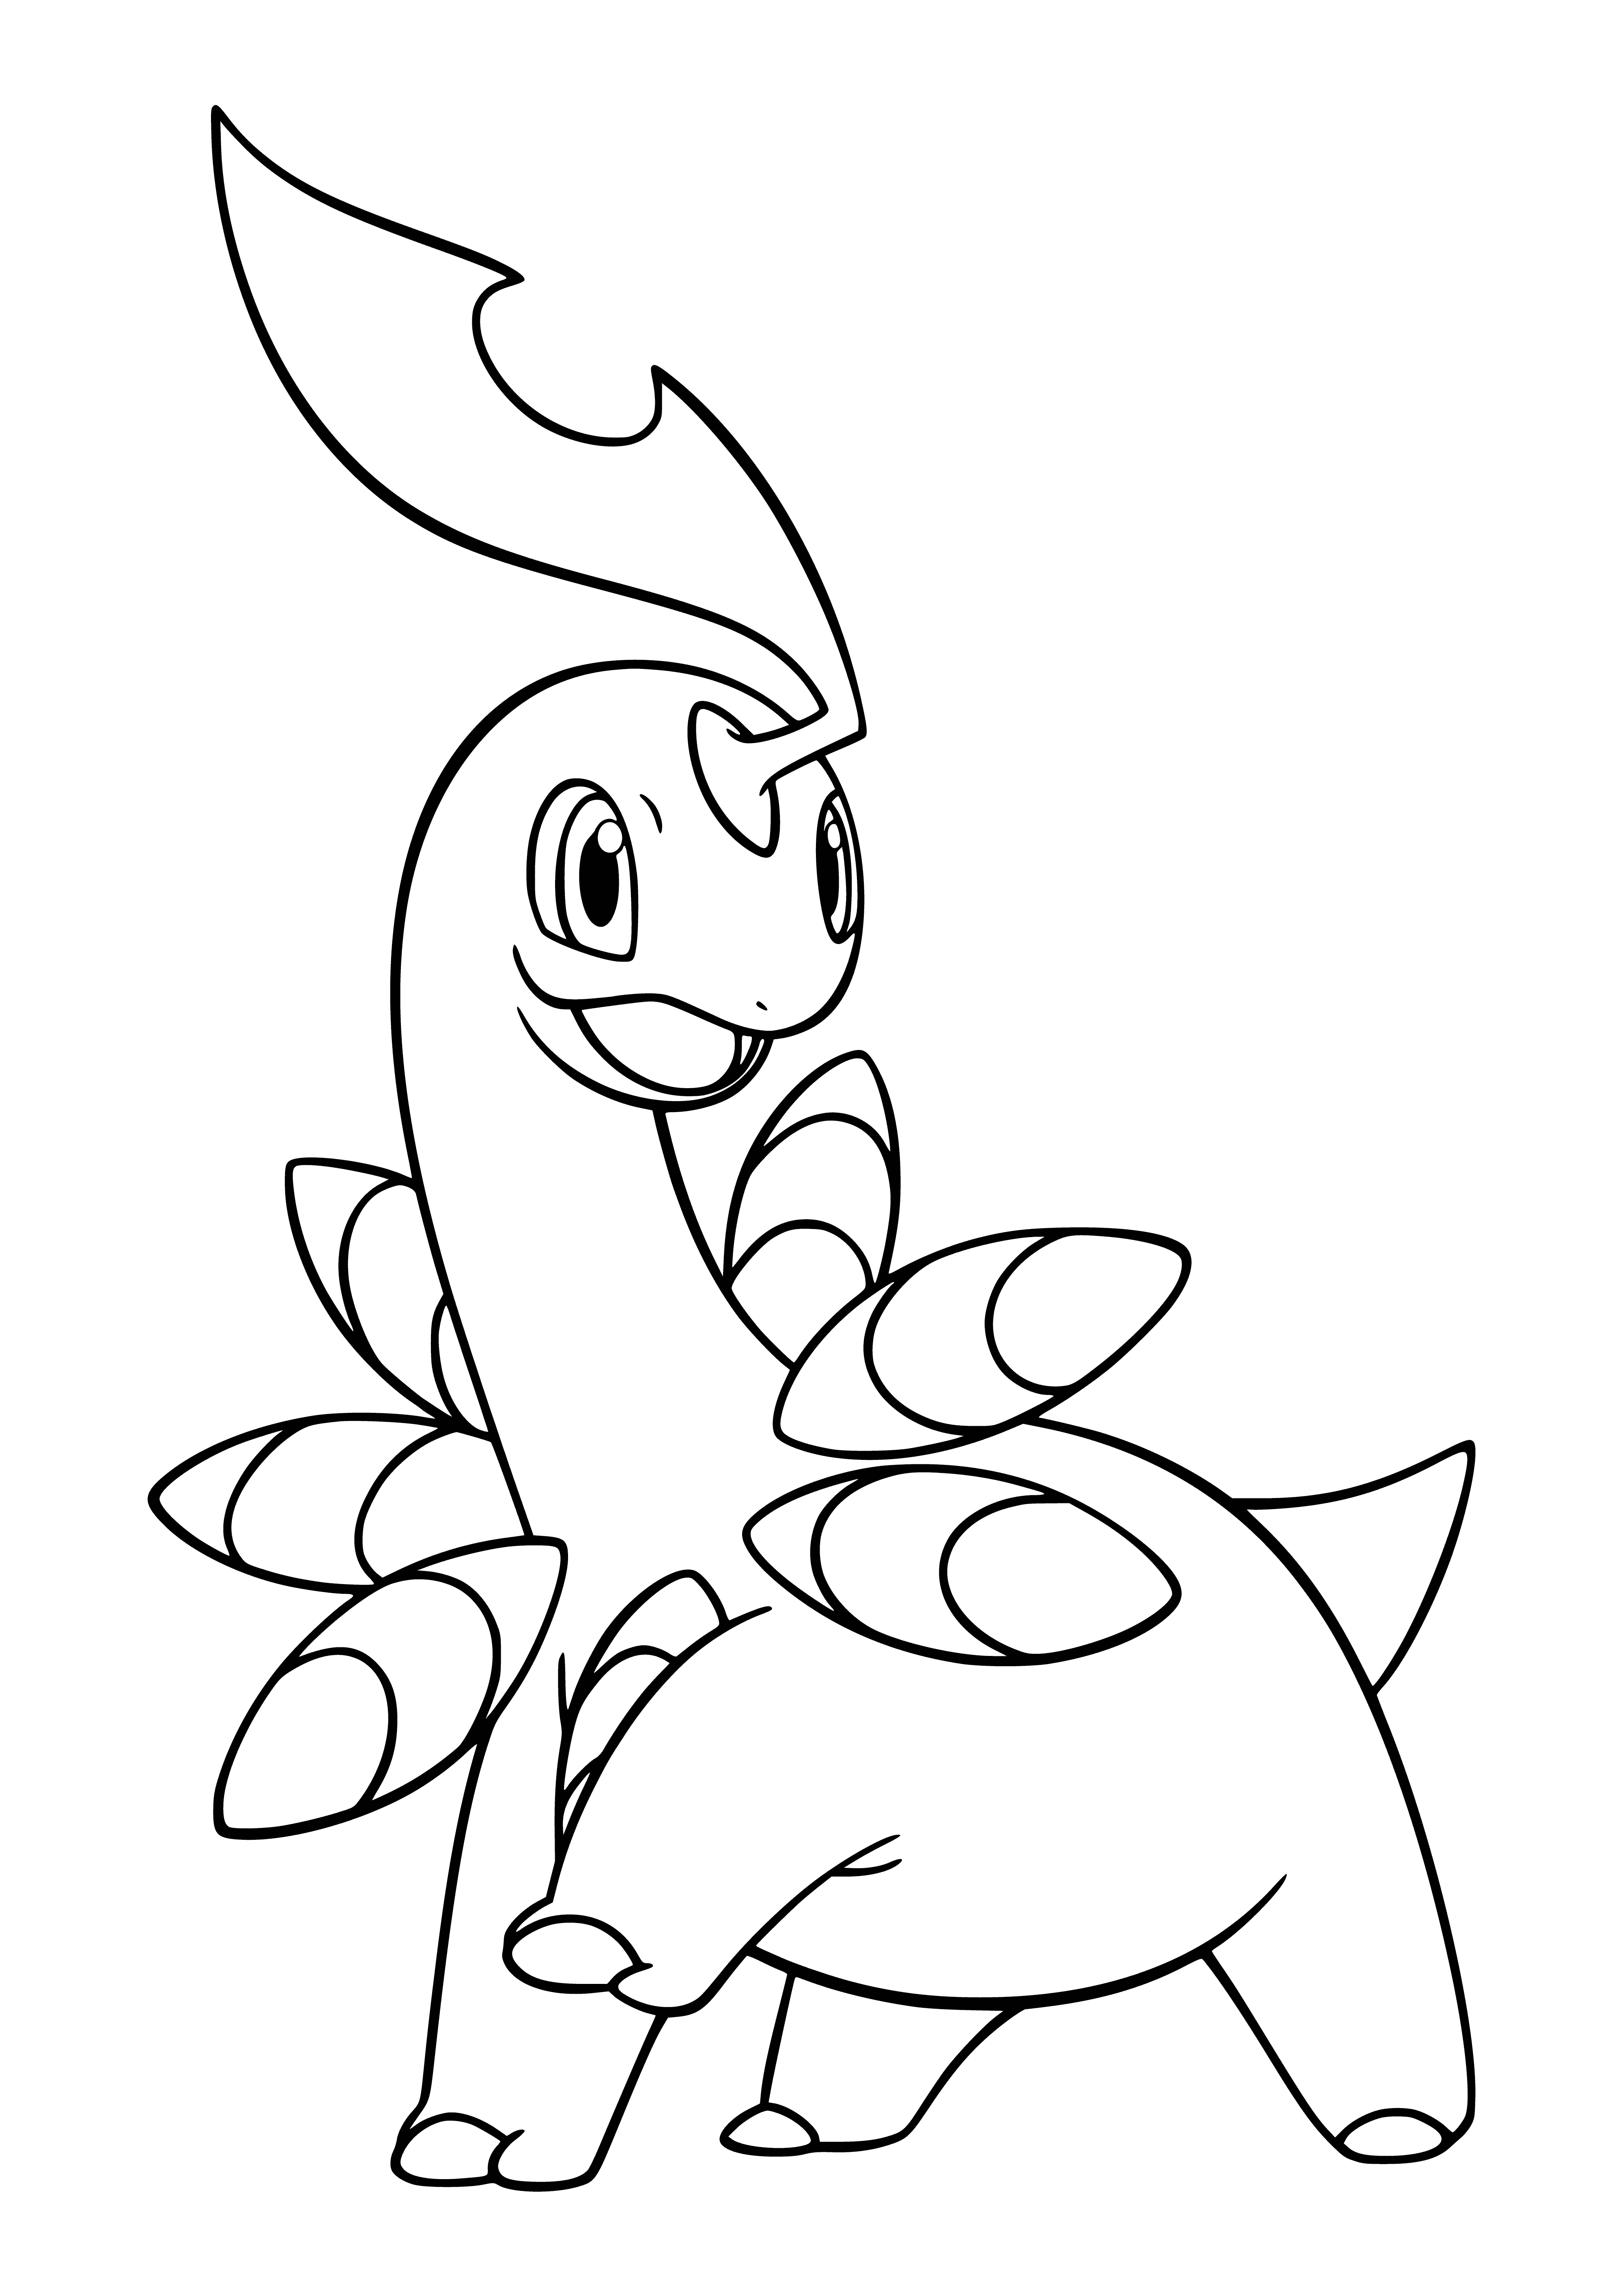 coloring page: Bayleef is a small, quadruped Pokemon with blue eyes & long, green leaves. Has a long neck & a small leaf on the tip of it. #Pokemon